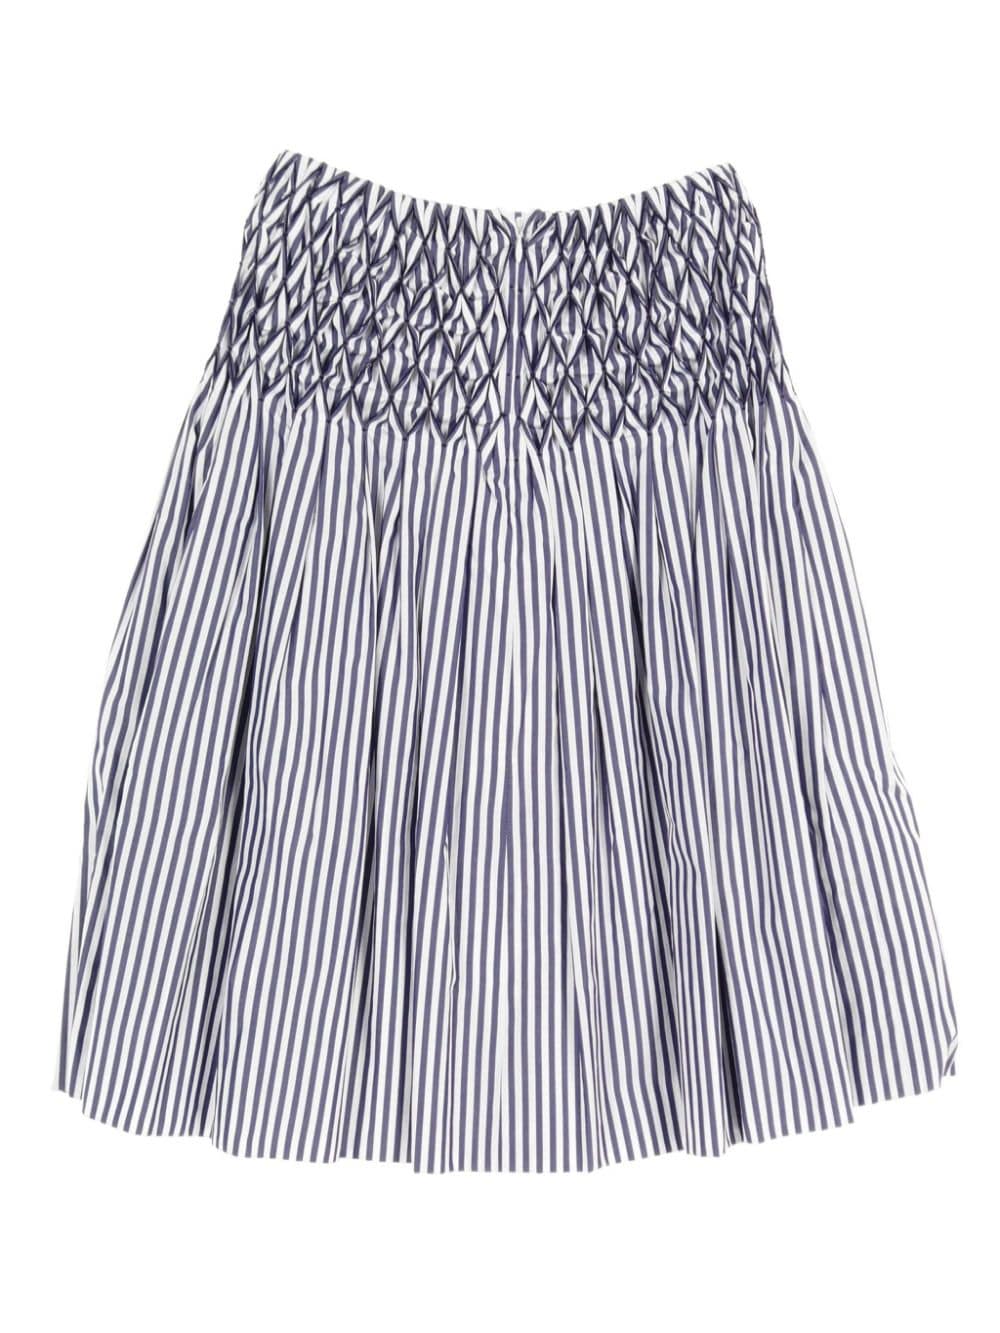 CHANEL Pre-Owned 1986-1988 striped midi skirt - Blauw